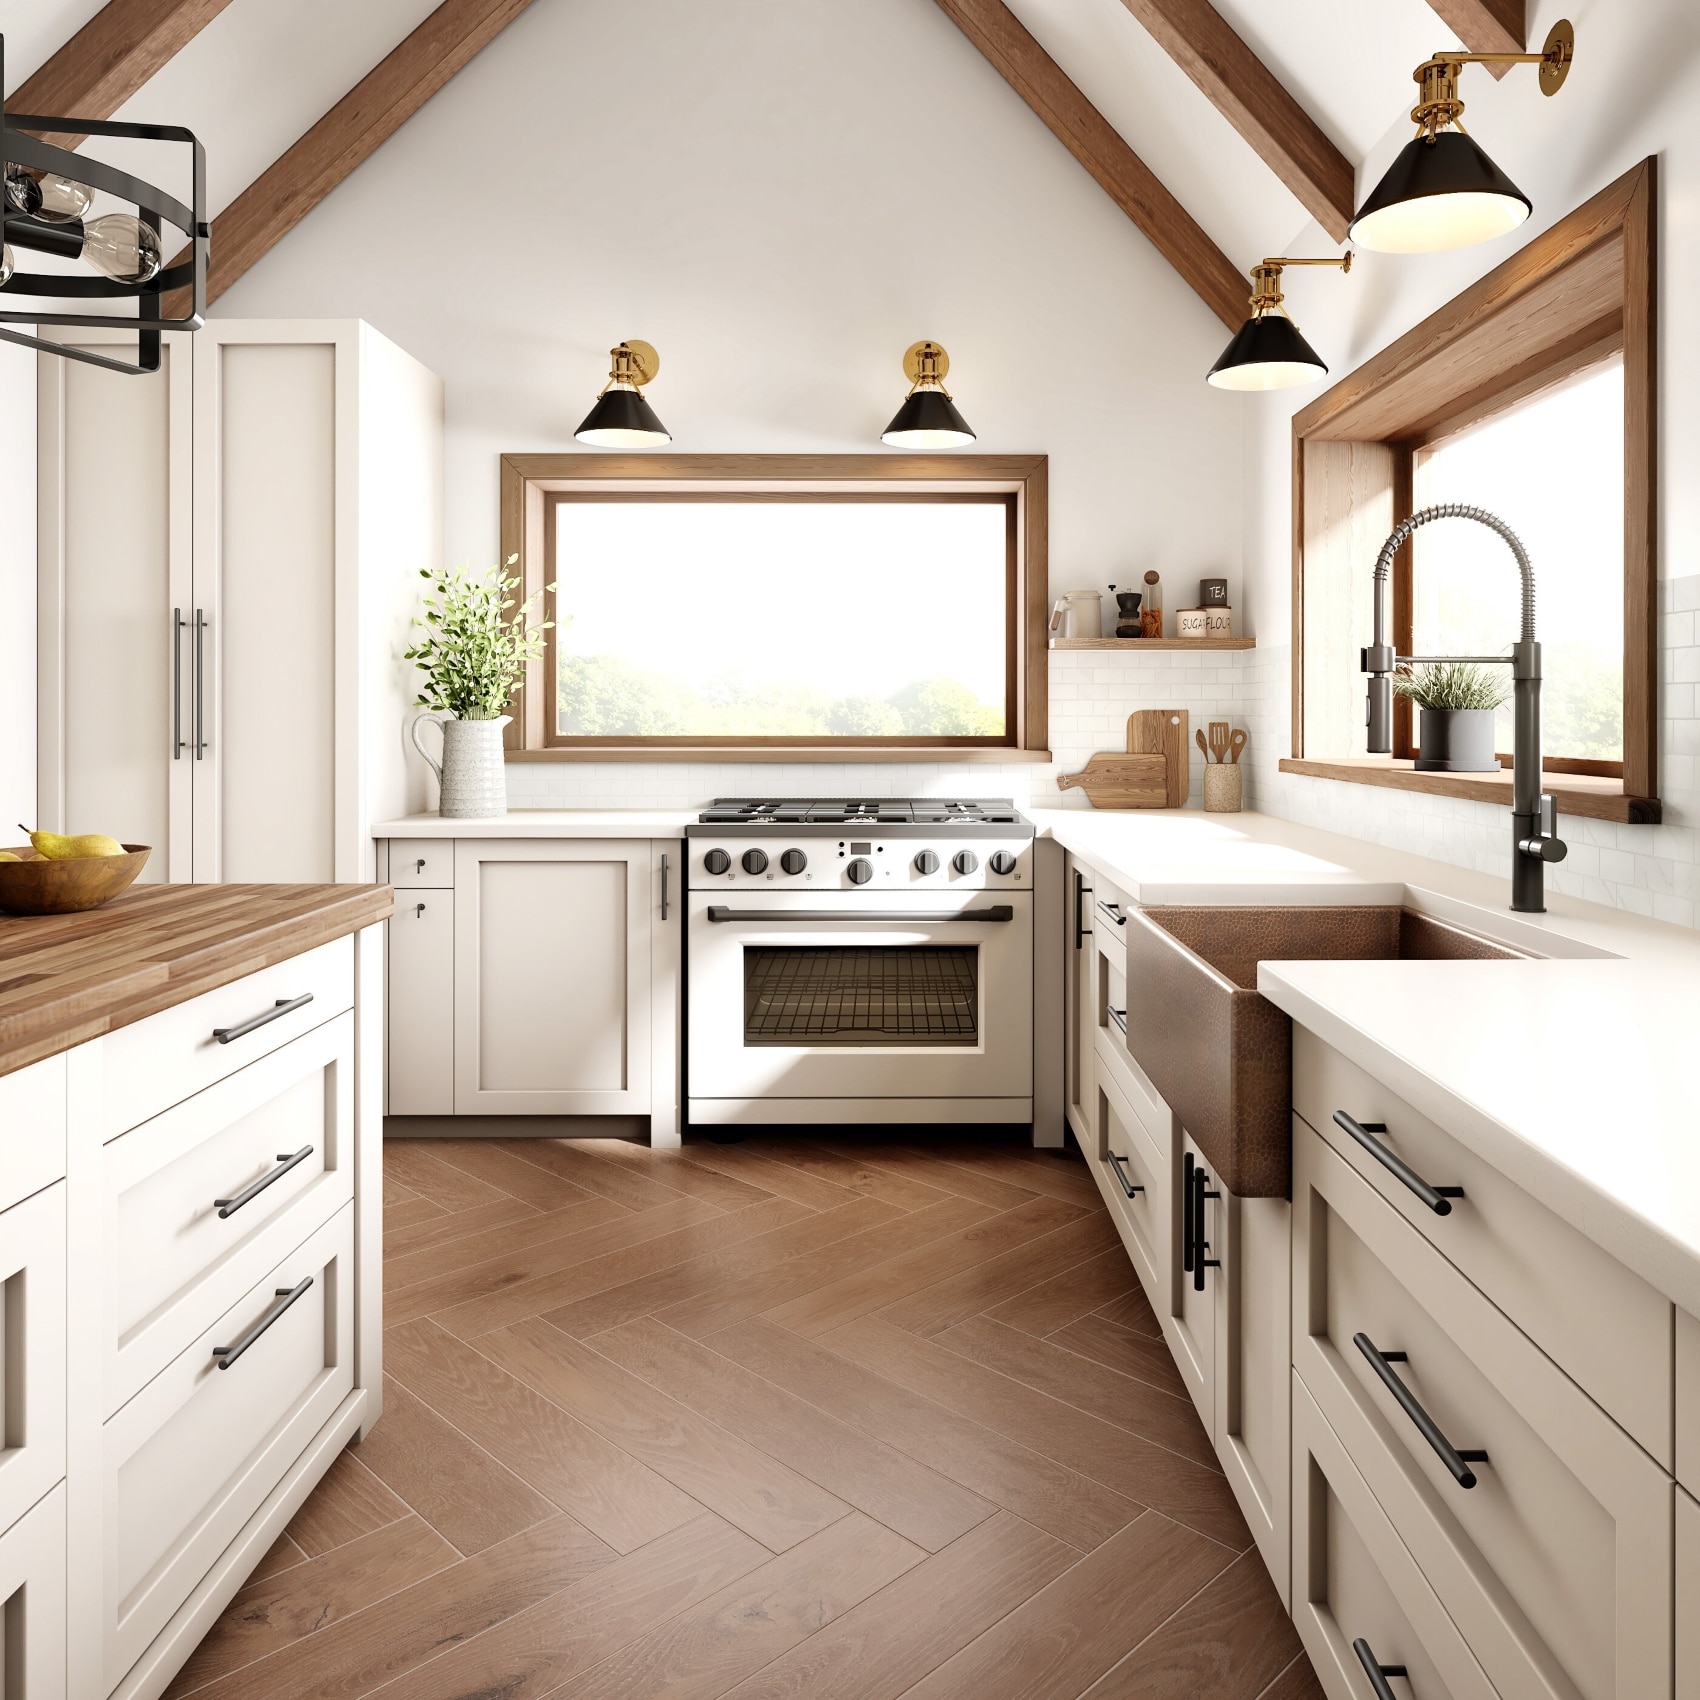 Bright kitchen with wood beams, copper accents and a butcher block countertop.